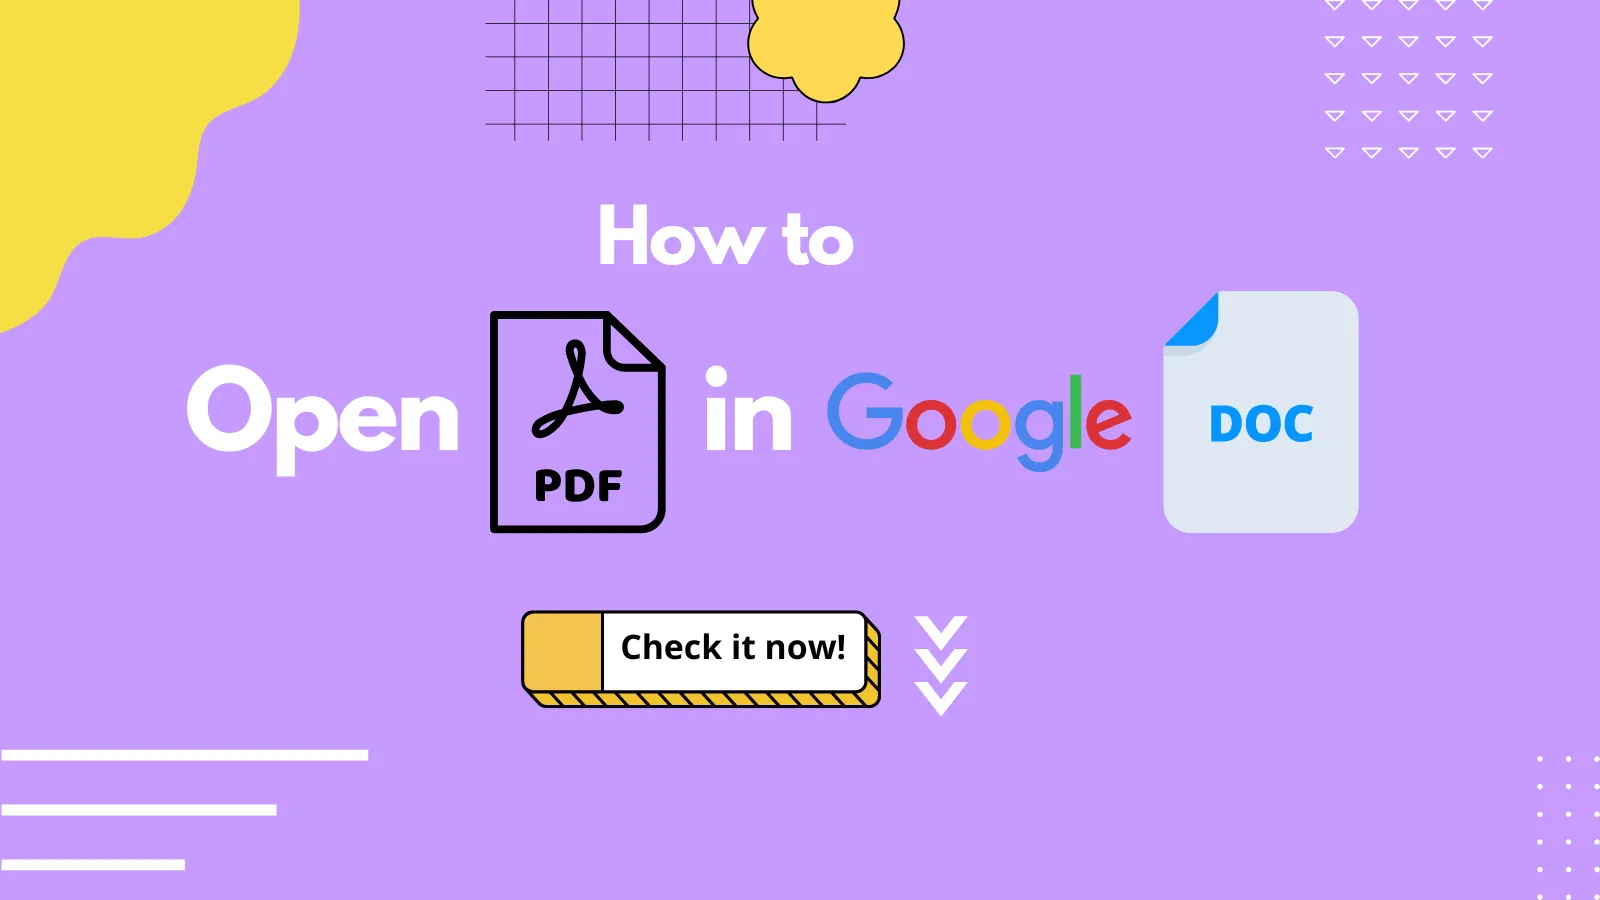 A Quick and Easy Guide to Open PDF in Google Docs